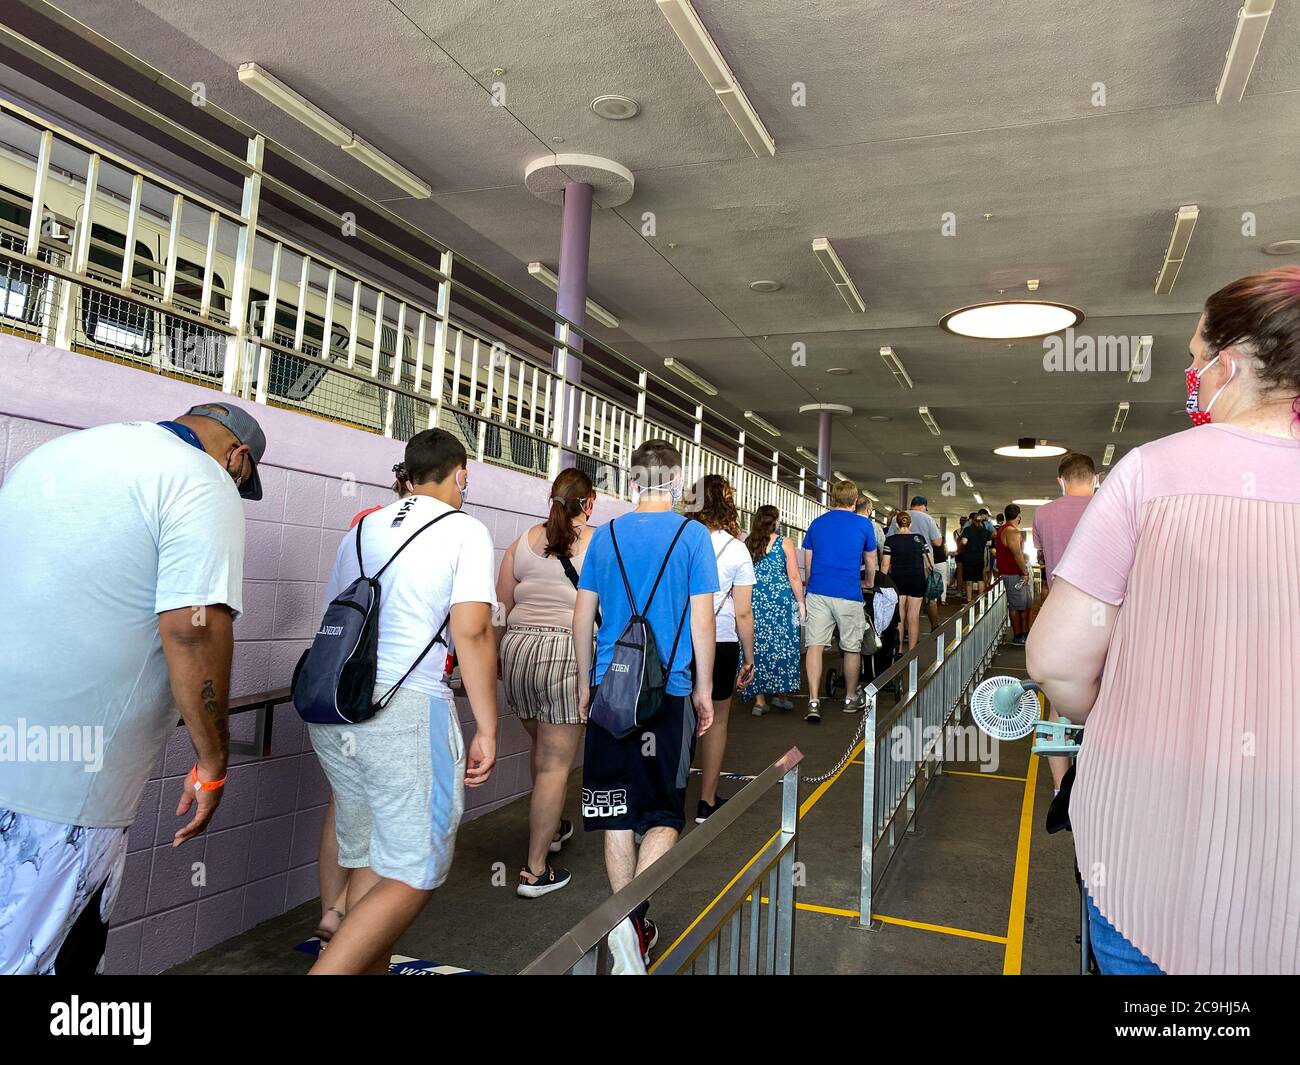 Orlando,FL/USA-7/25/20: People wearing face masks and social distancing while waiting in line to get on the monorail at  Walt Disney World Resorts in Stock Photo